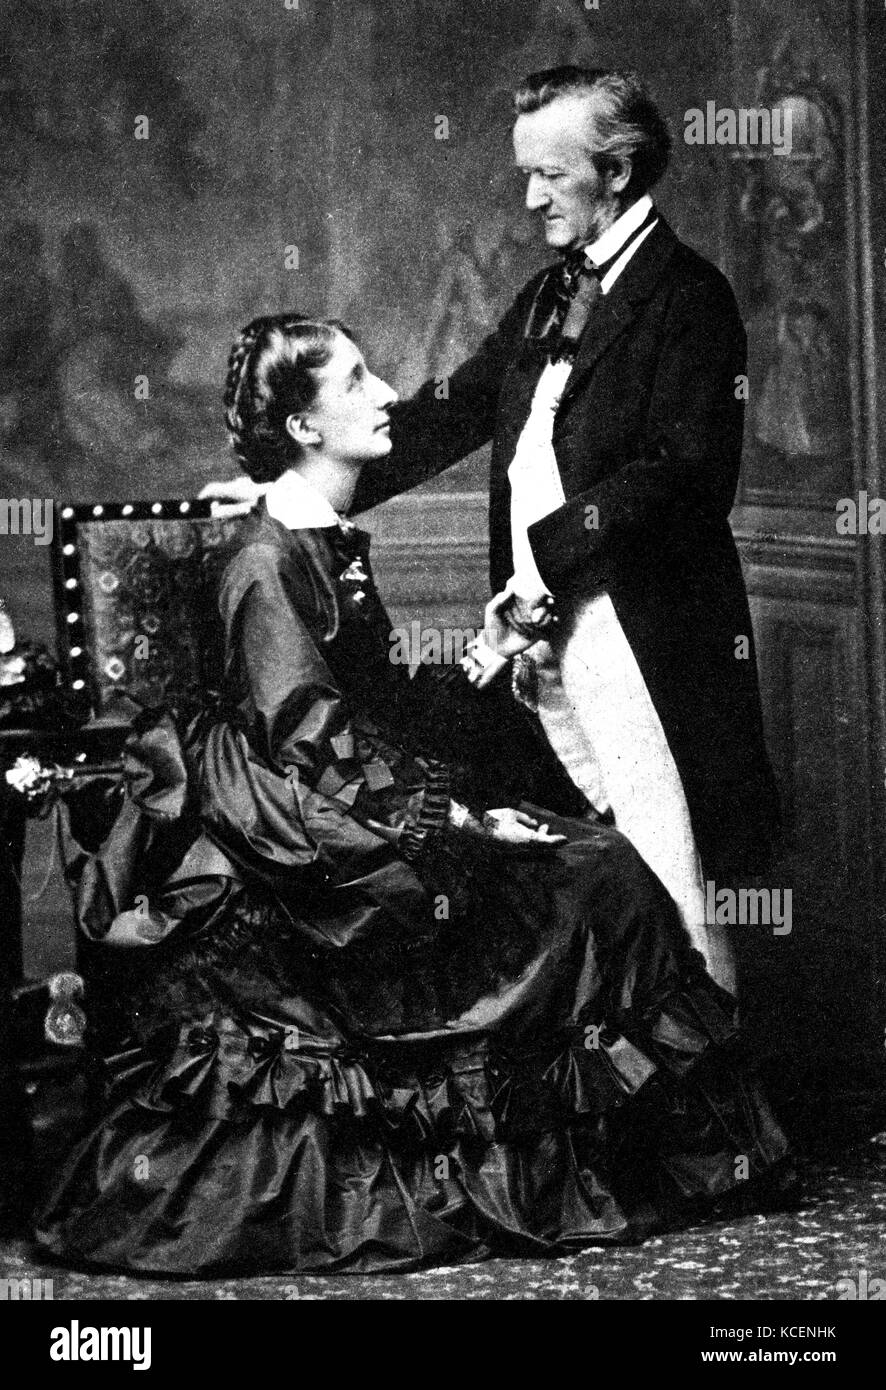 Photograph of German composer Wilhelm Wagner (1813-1883) and his second wife Cosima Wagner (1837-1930) whom together founded the Bayreuth Festival. Dated 19th Century Stock Photo